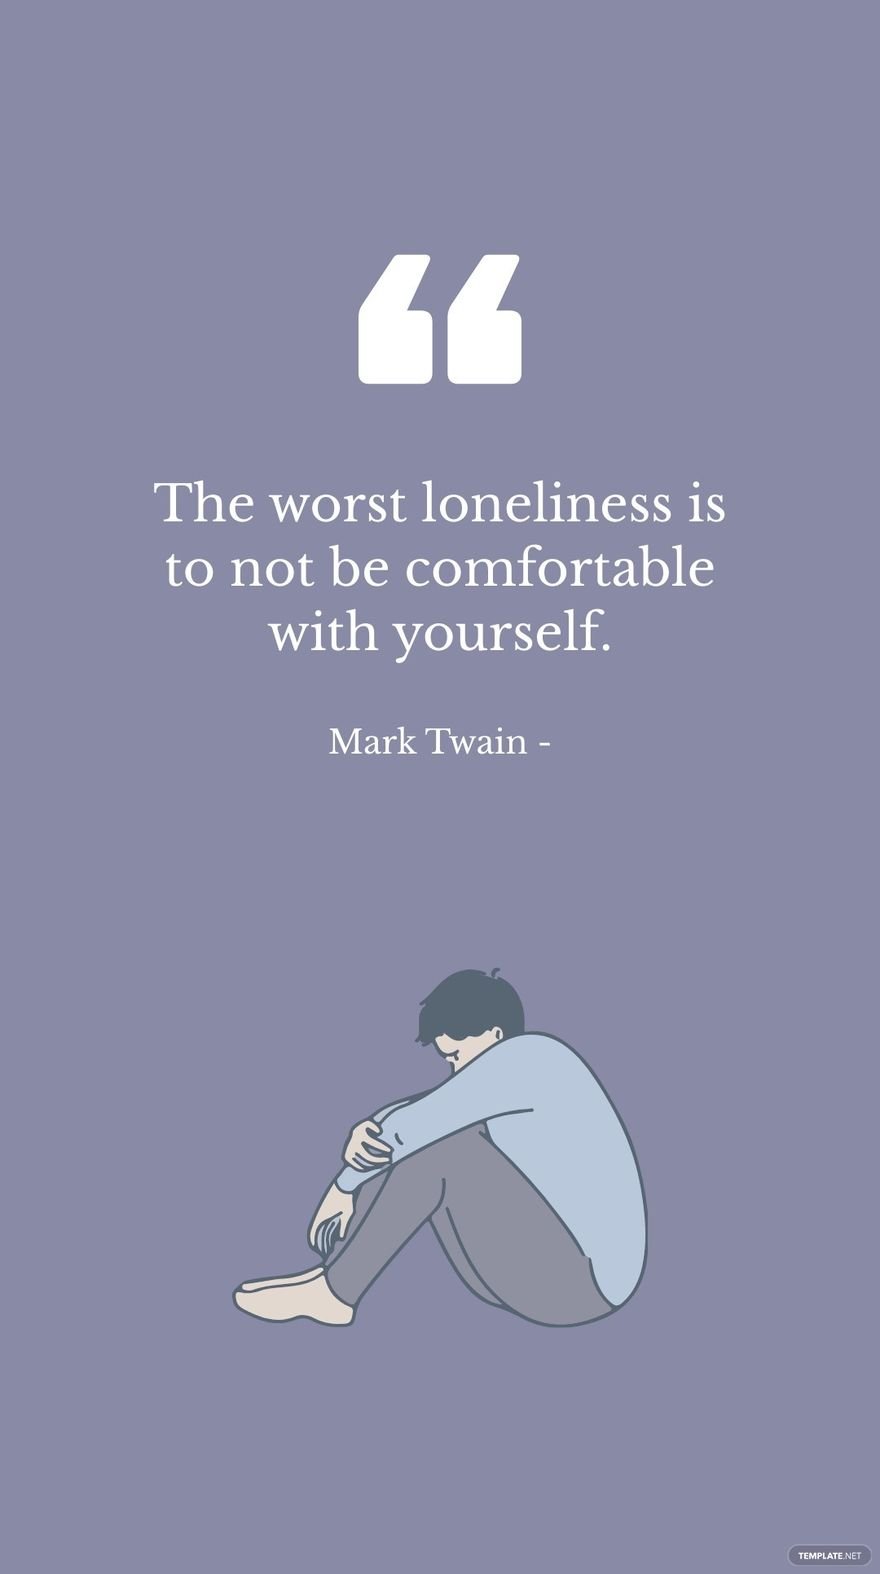 Free Mark Twain - The worst loneliness is to not be comfortable with yourself. in JPG